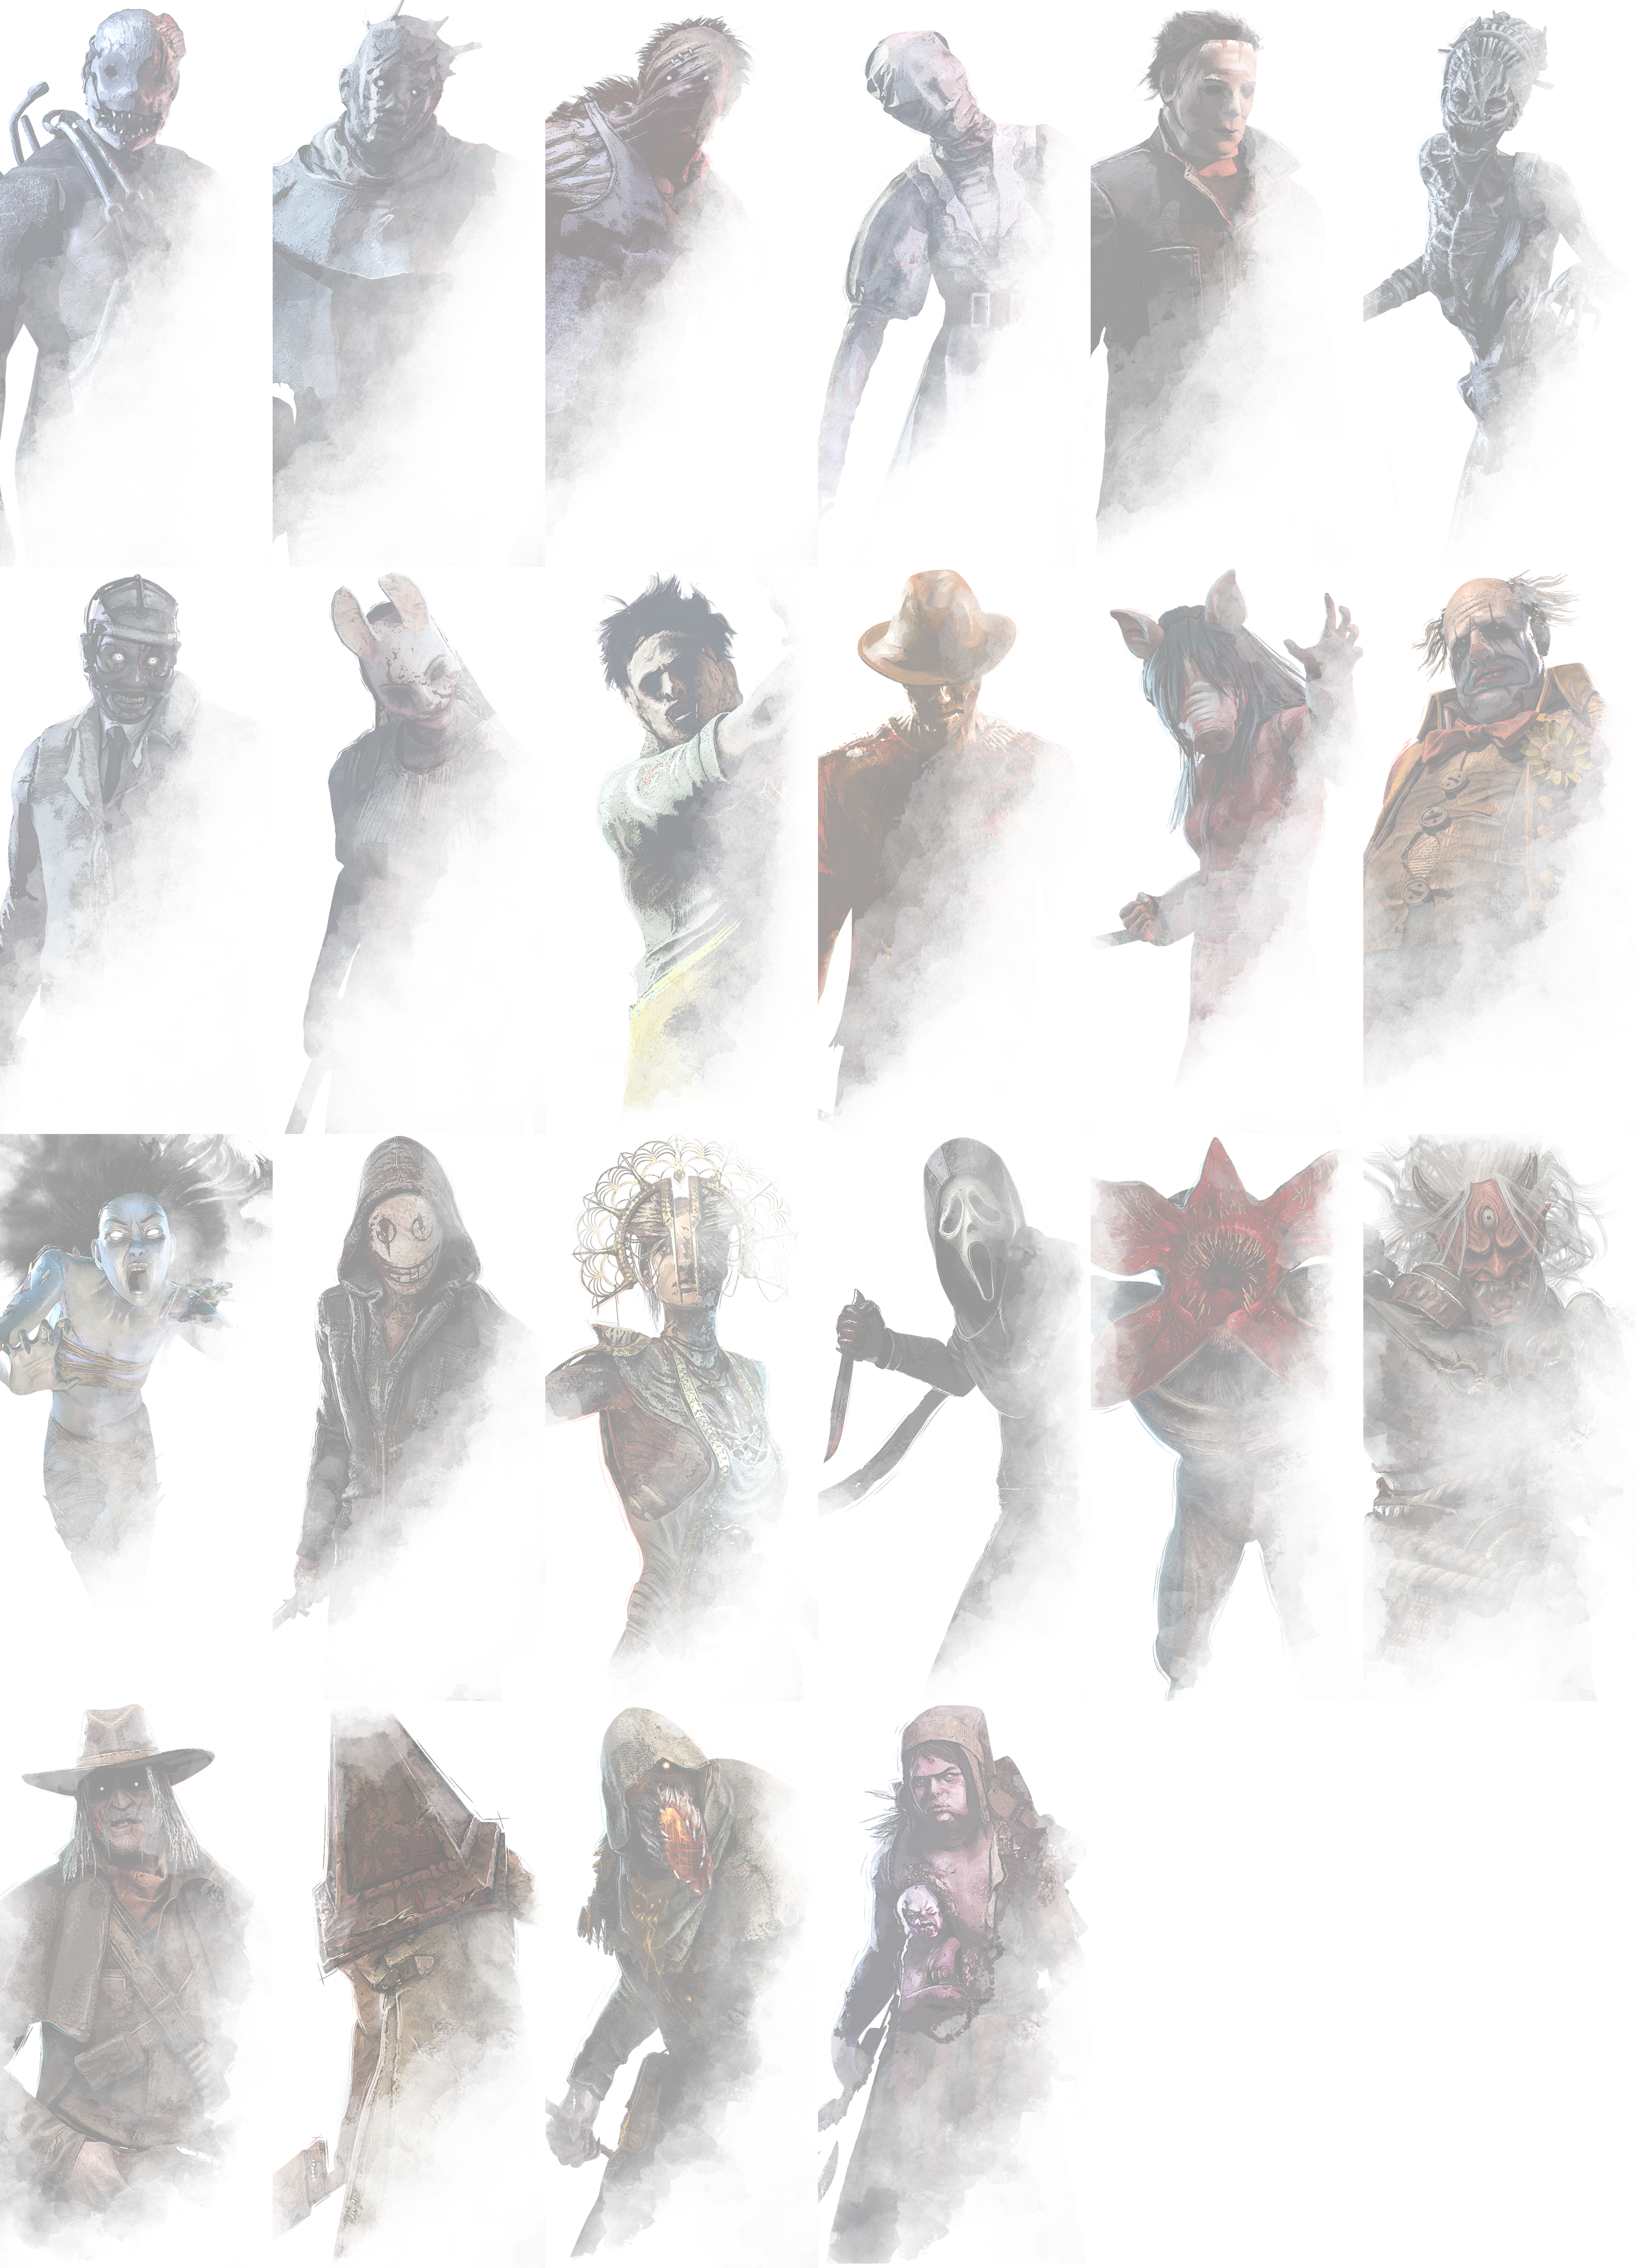 Dead by Daylight - Biography Background